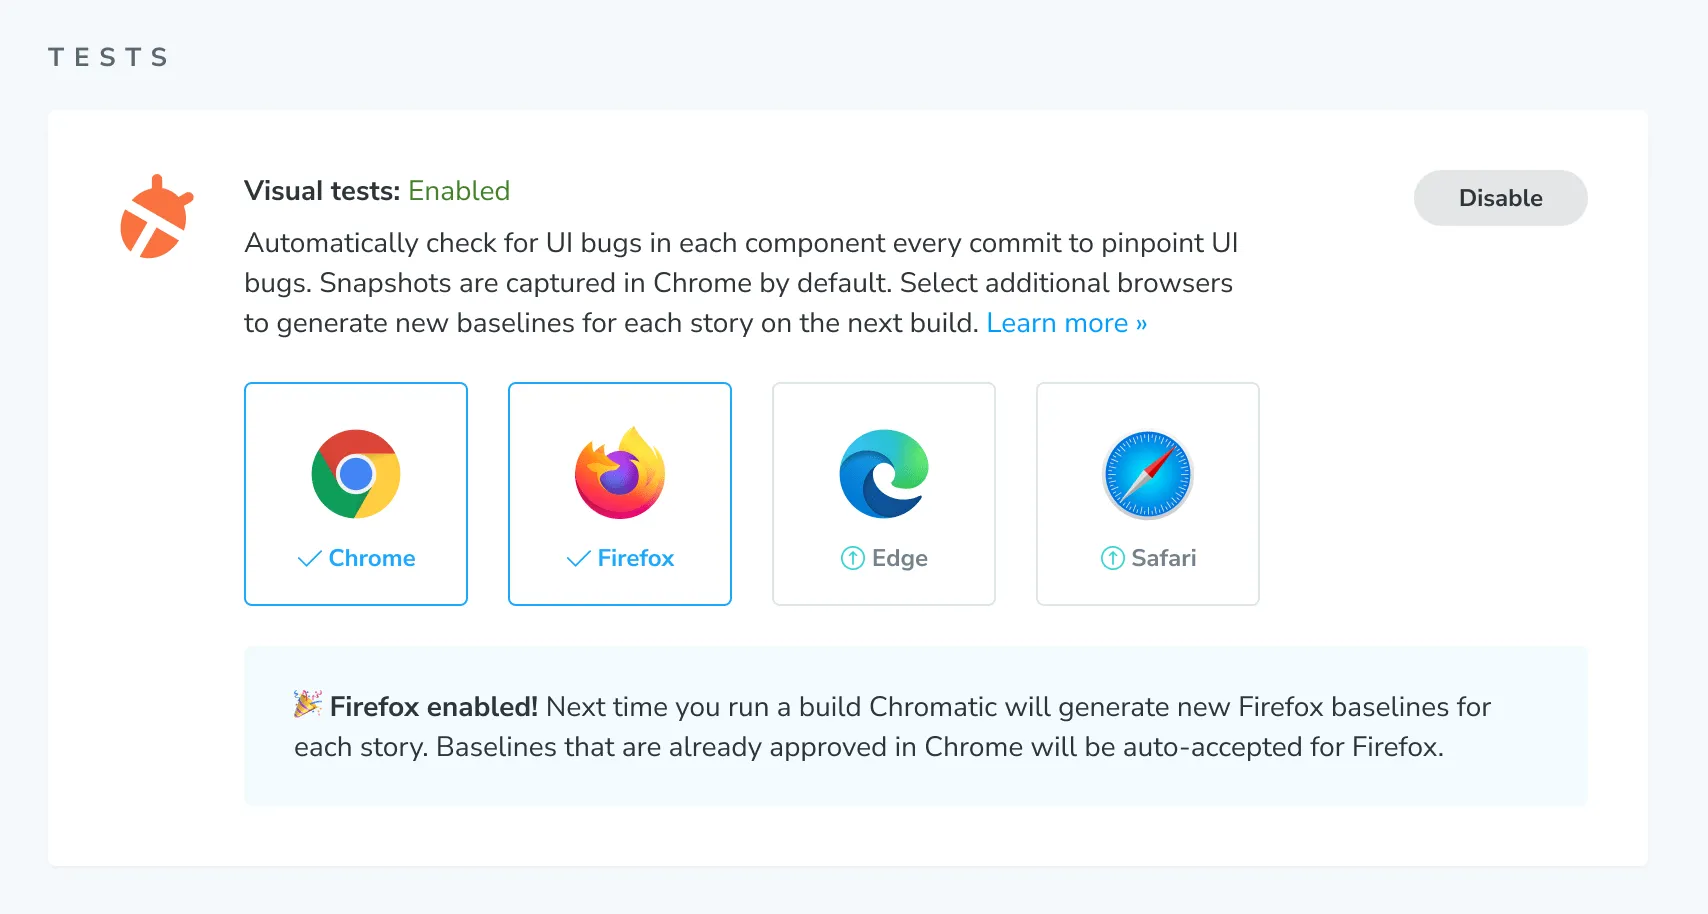 Enable firefox in Chromatic